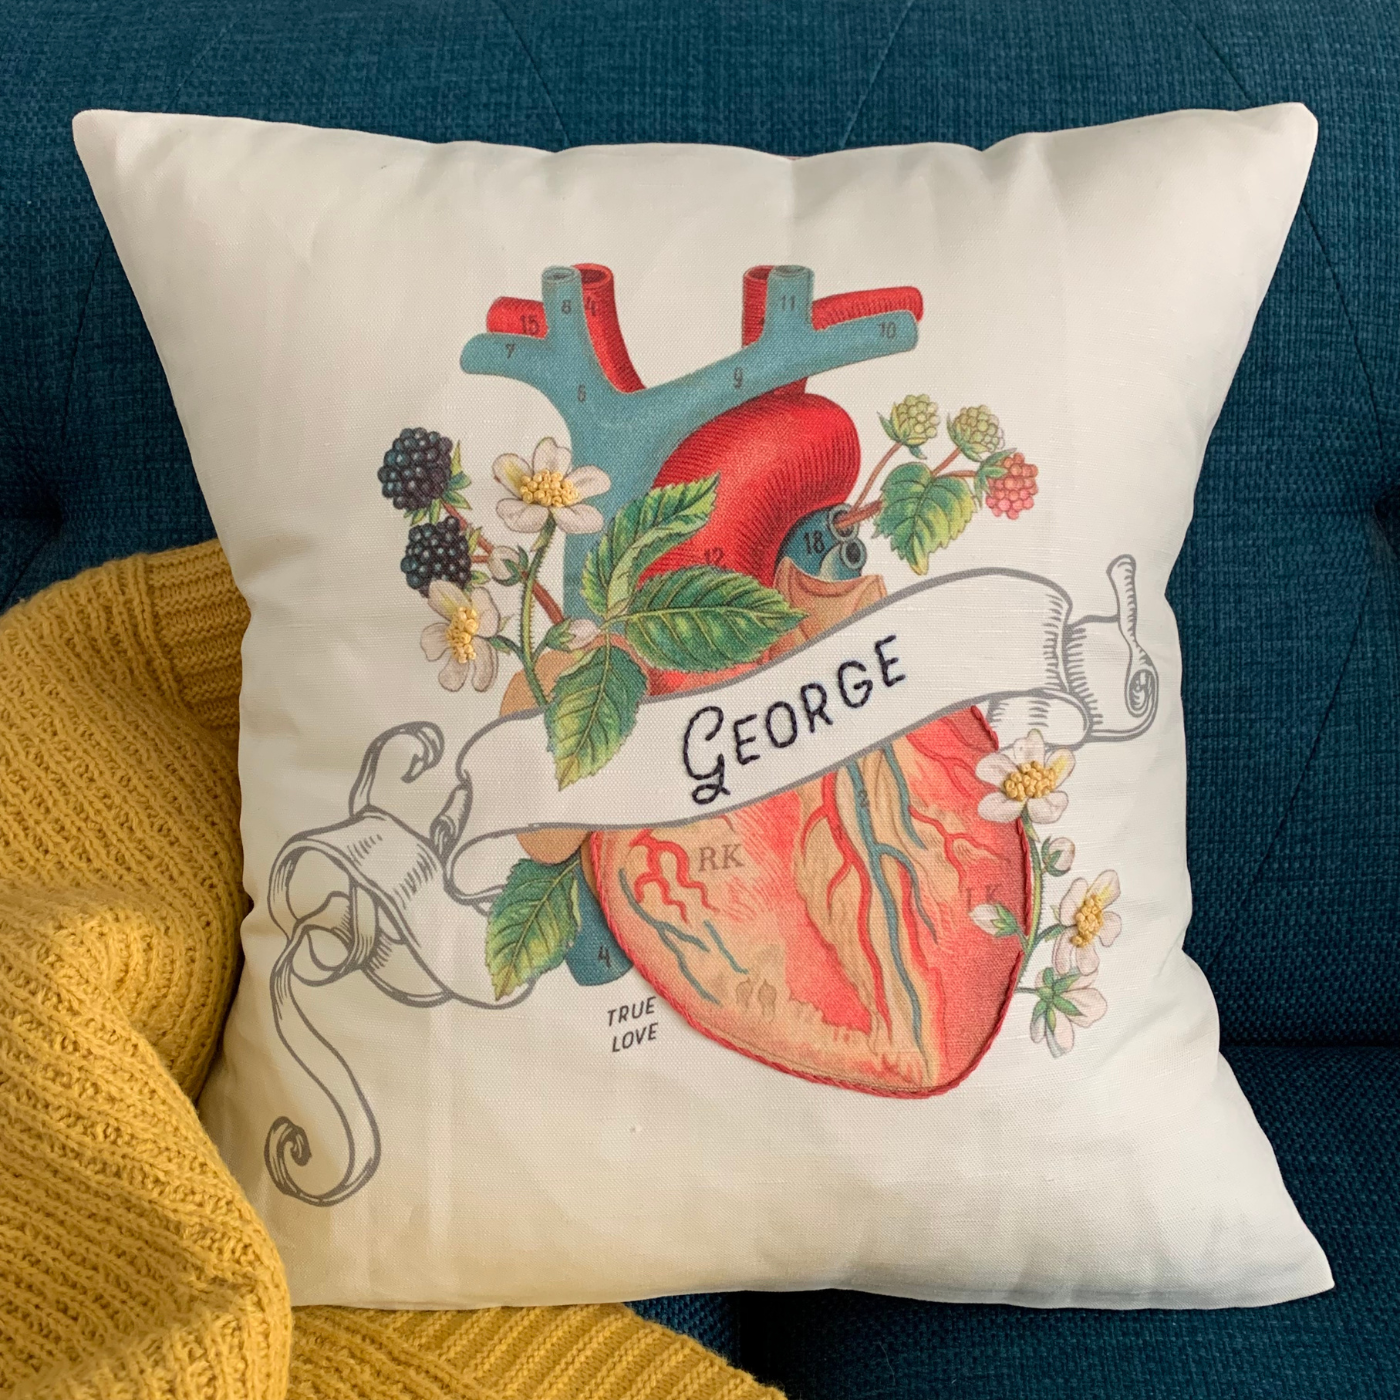 A cream throw pillow with an anatomical heart design printed on it has a banner running through the middle of the heart that says “George,” which is stitched in black font. The pillow sits on a blue chair next to a yellow blanket.